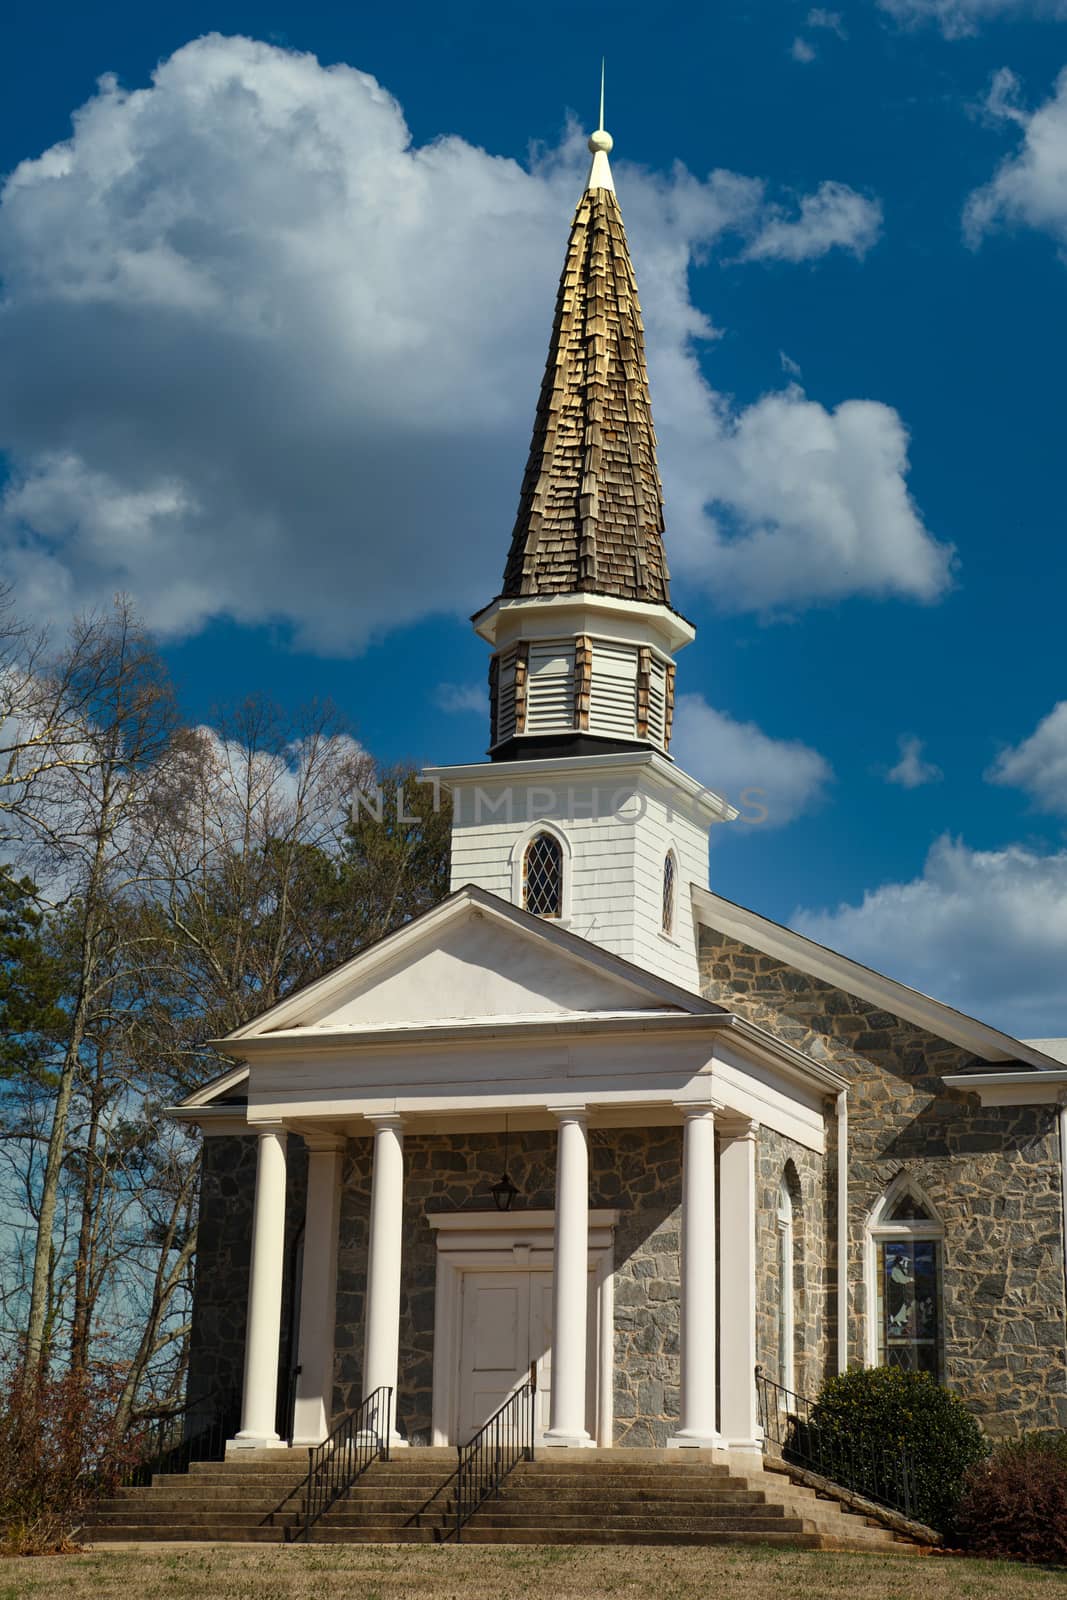 An old wood and stone church with a wood shingled steeple under clear blue skies